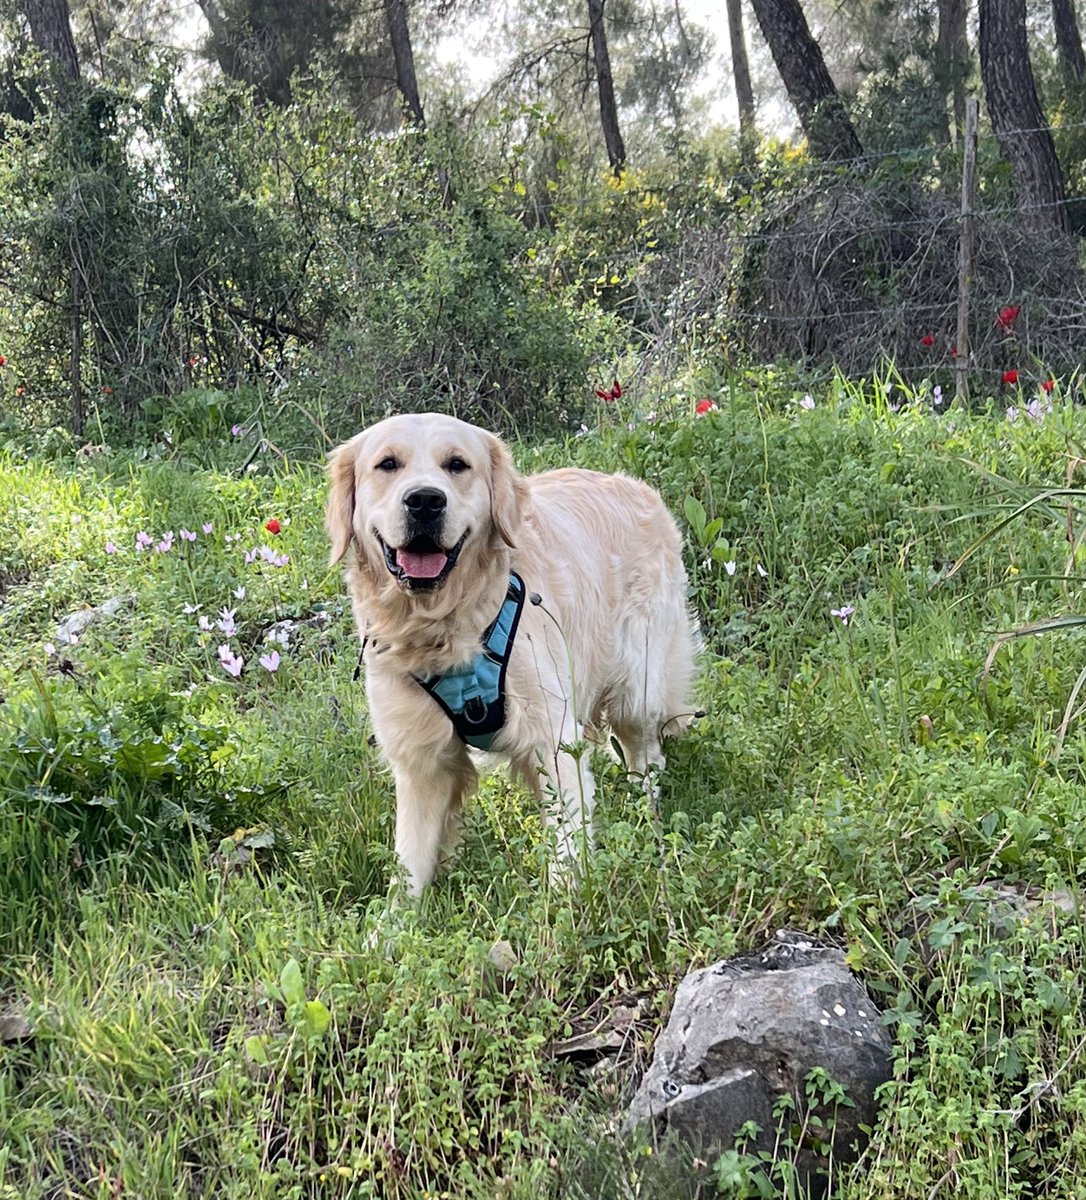 Wishing everyone a great Tuesday, with thoughts of sunshine and green grass, flowers and springtime! Happy Day friends! 🐾💙Finn #TOT #TongueOutTuesday #DogsofTwitter #GoldenRetriever